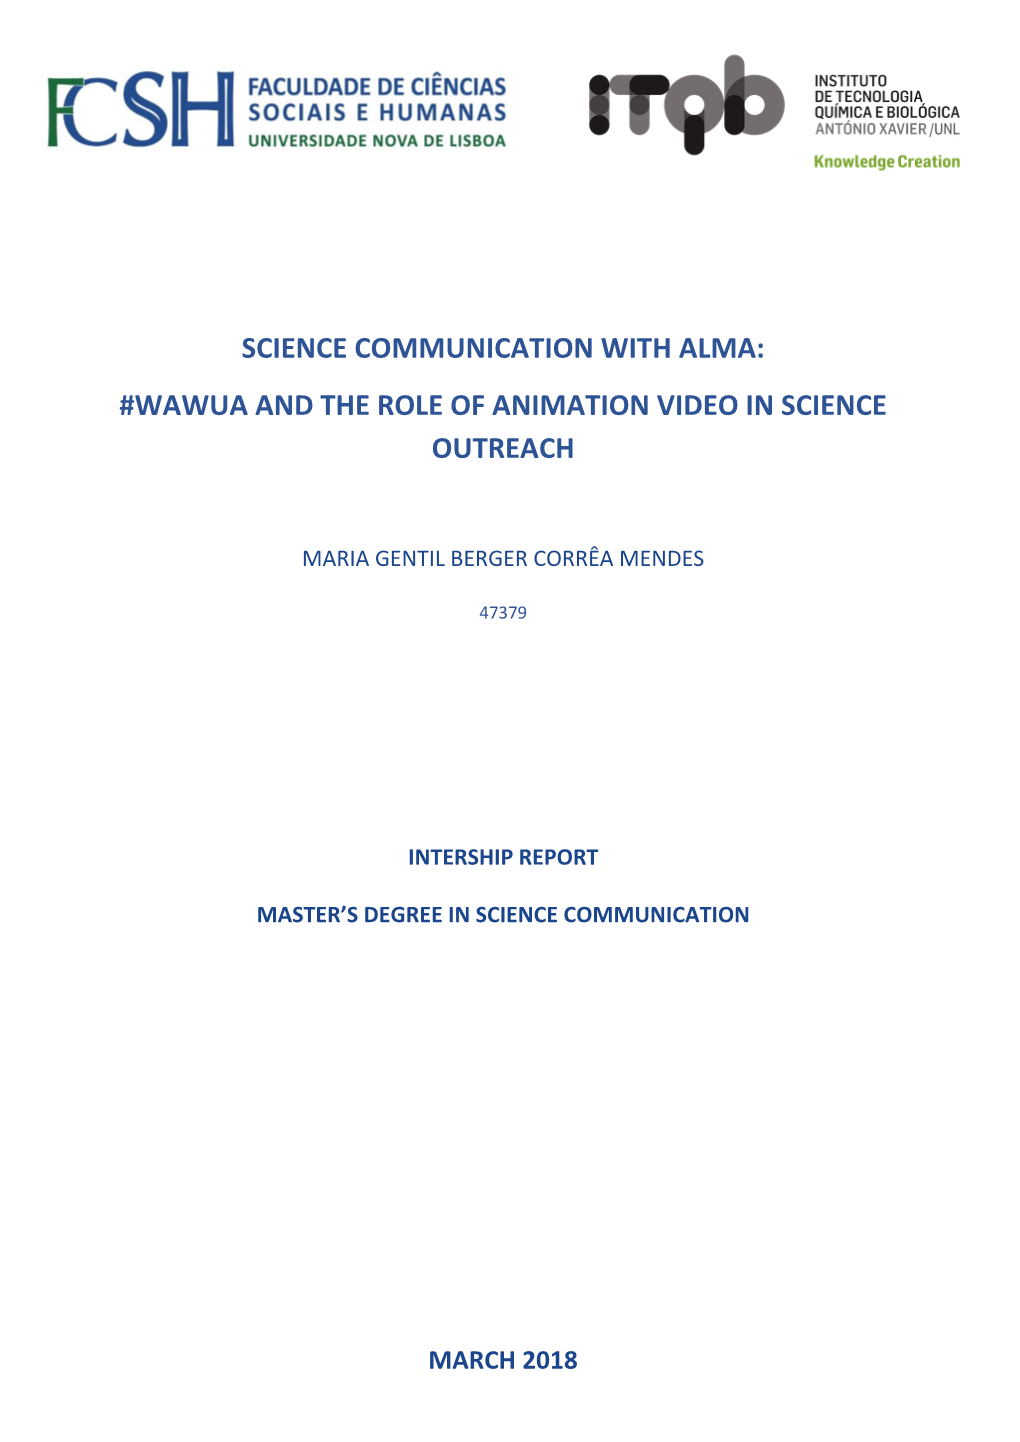 Science Communication with Alma: #Wawua and the Role of Animation Video in Science Outreach